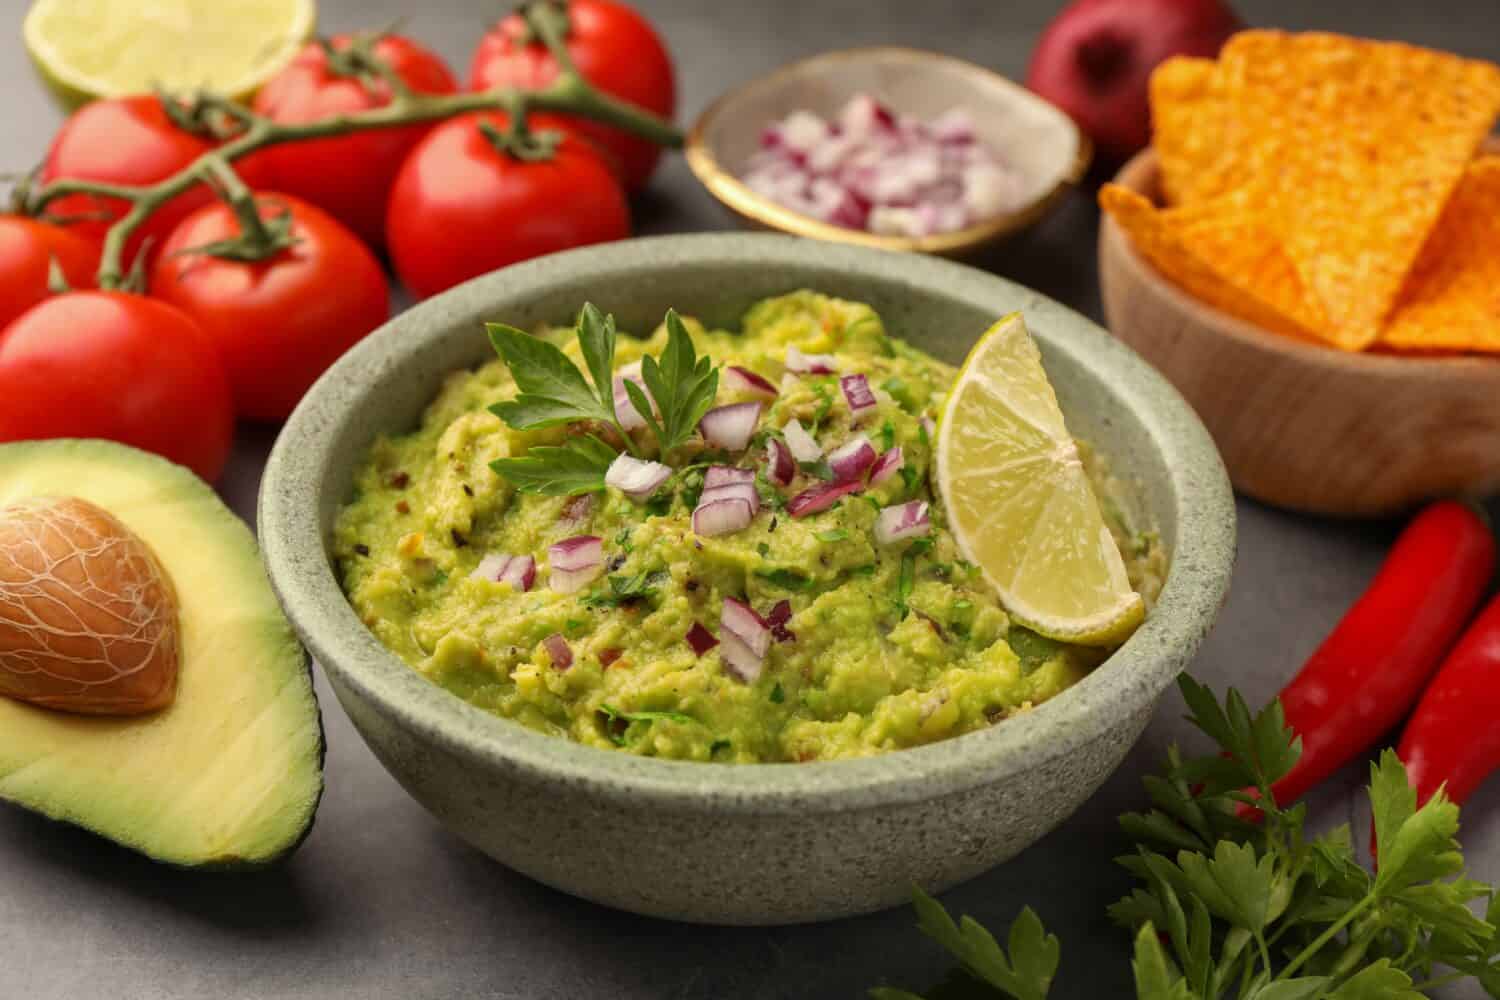 Bowl of delicious guacamole, nachos chips and ingredients on grey table, closeup